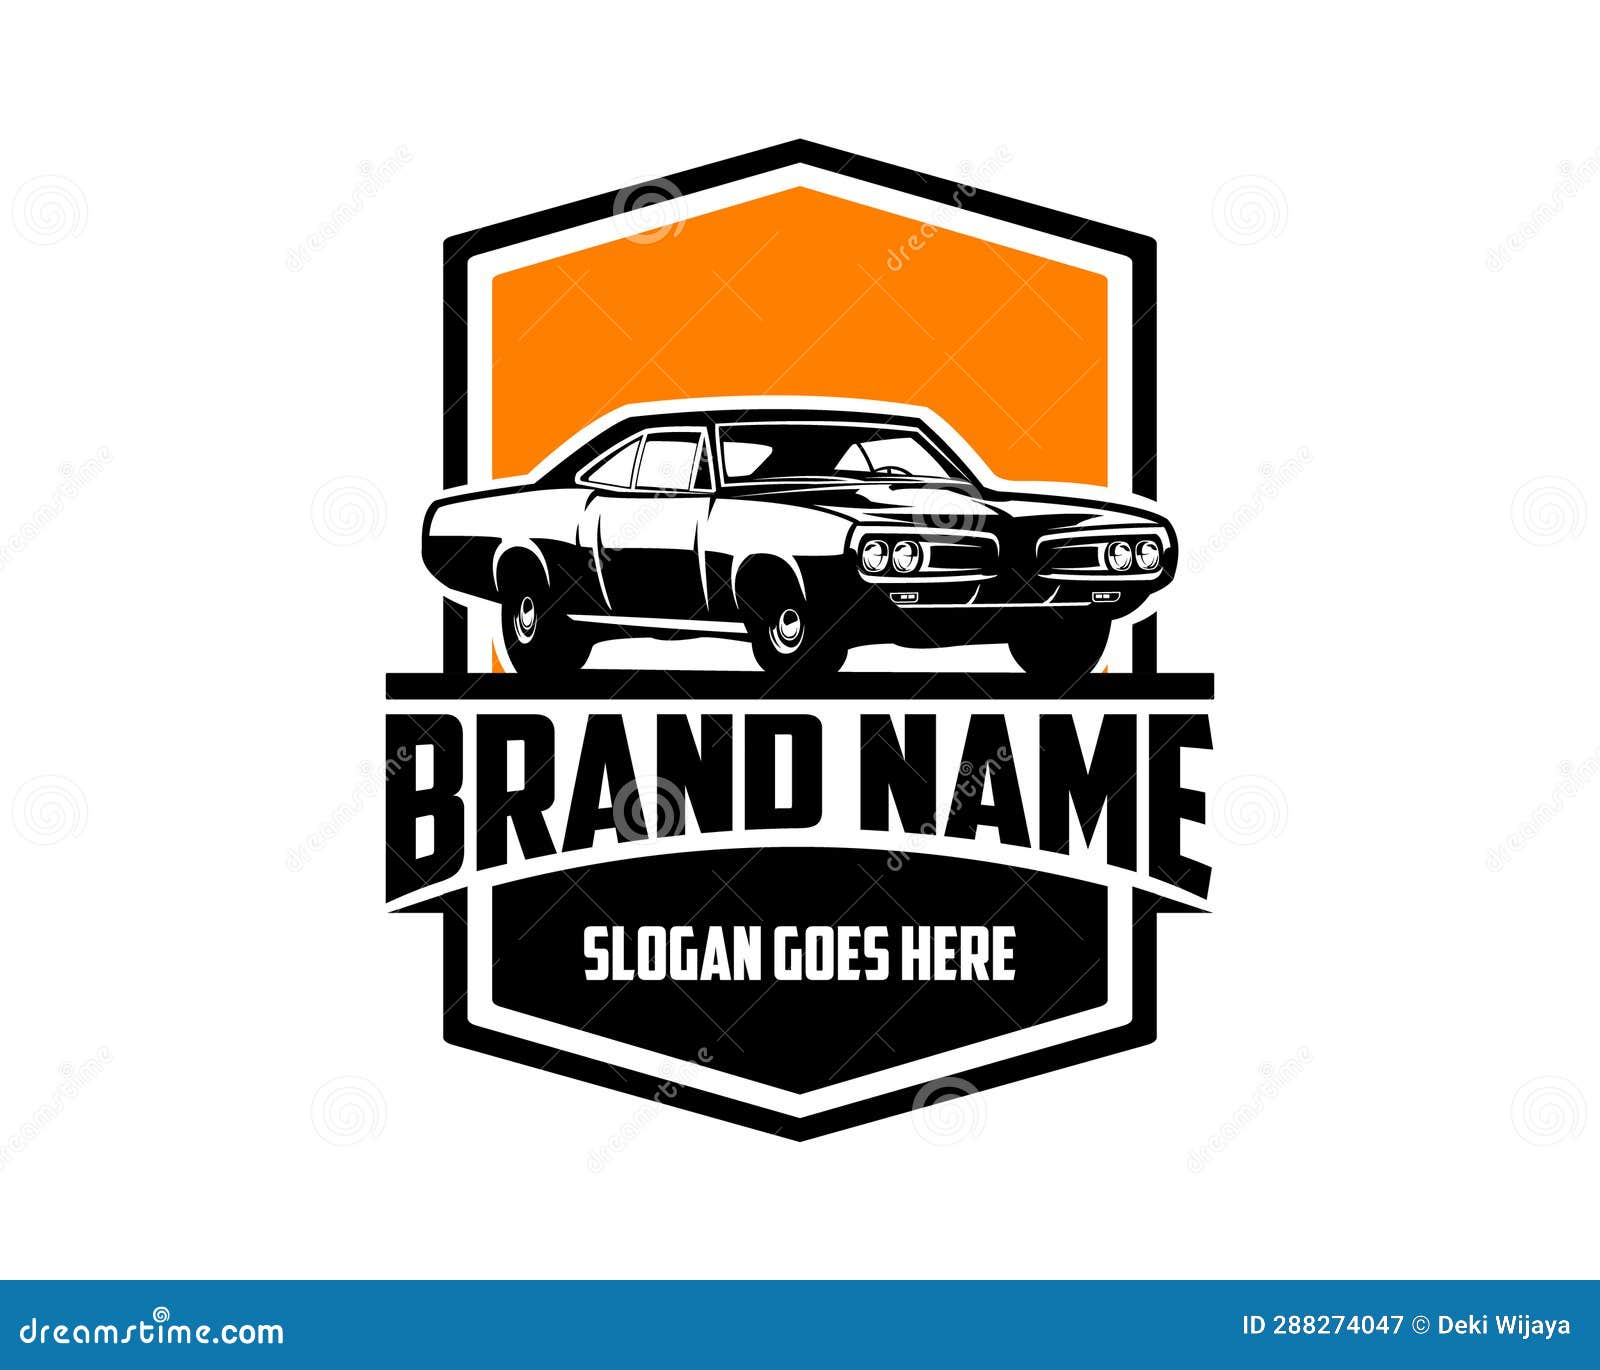 1969 dodge super bee car. vintage car logo silhouette.  white background view from side.